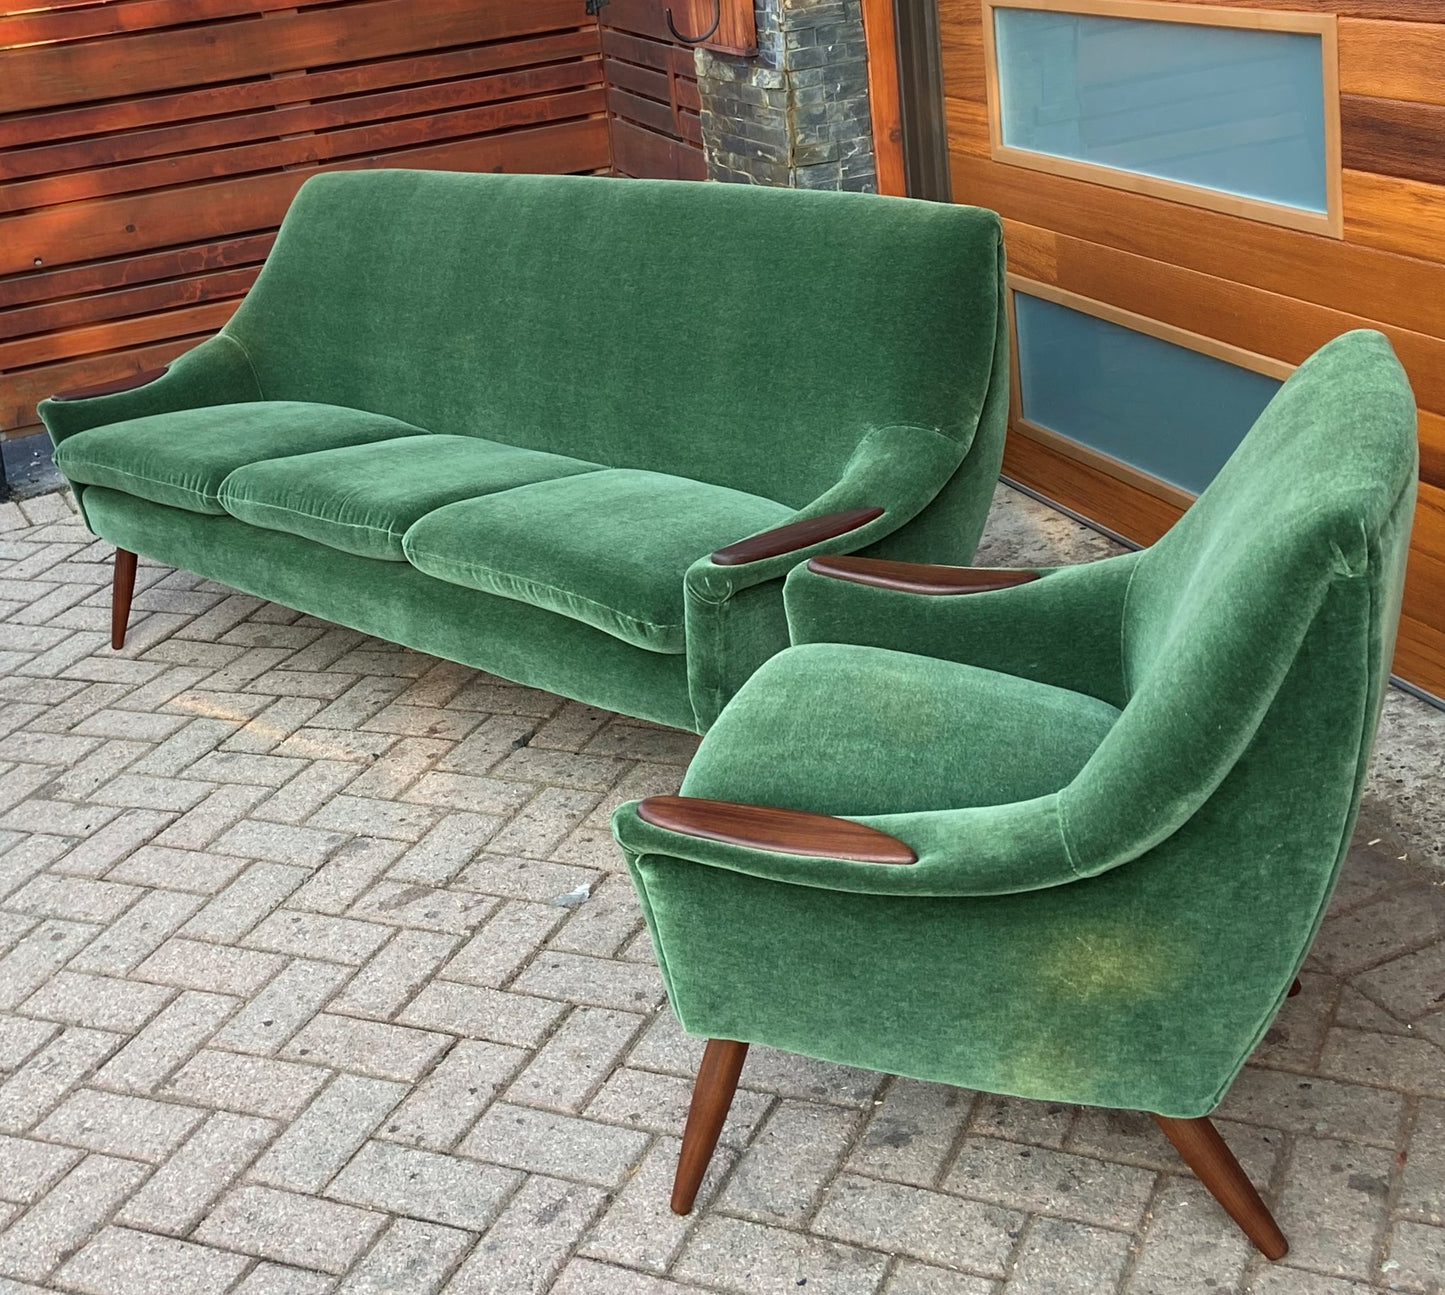 REFINISHED REUPHOLSTERED in wool mohair Danish MCM Teak Sofa & Lounge Chair, PERFECT